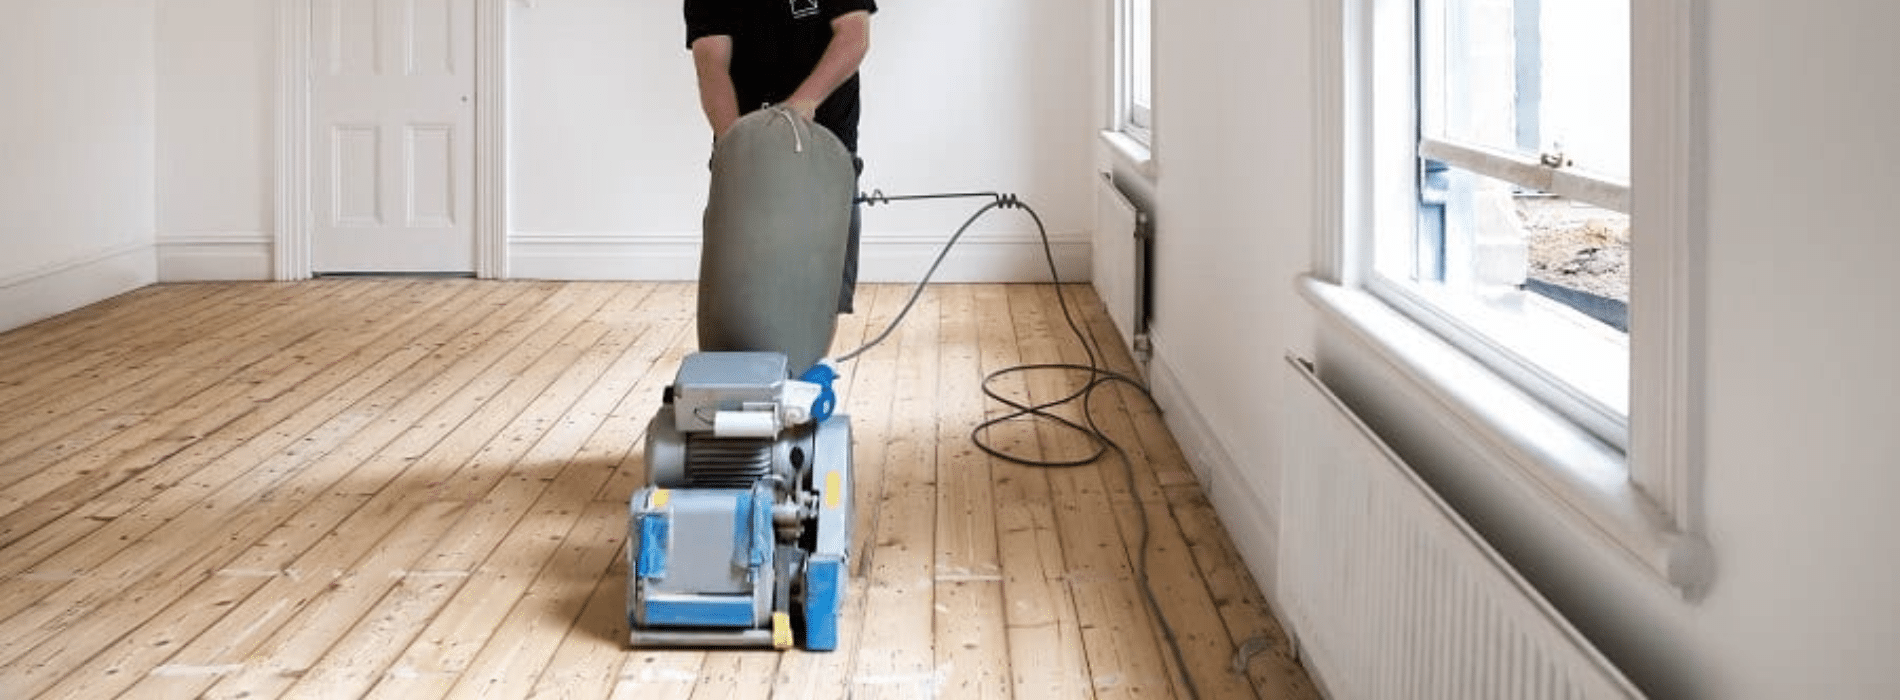 Experience the precision of Mr Sander® using the powerful Effect 2200 belt sander. Witness clean and efficient results on a 200x750 mm herringbone floor with HEPA-filtered dust extraction.